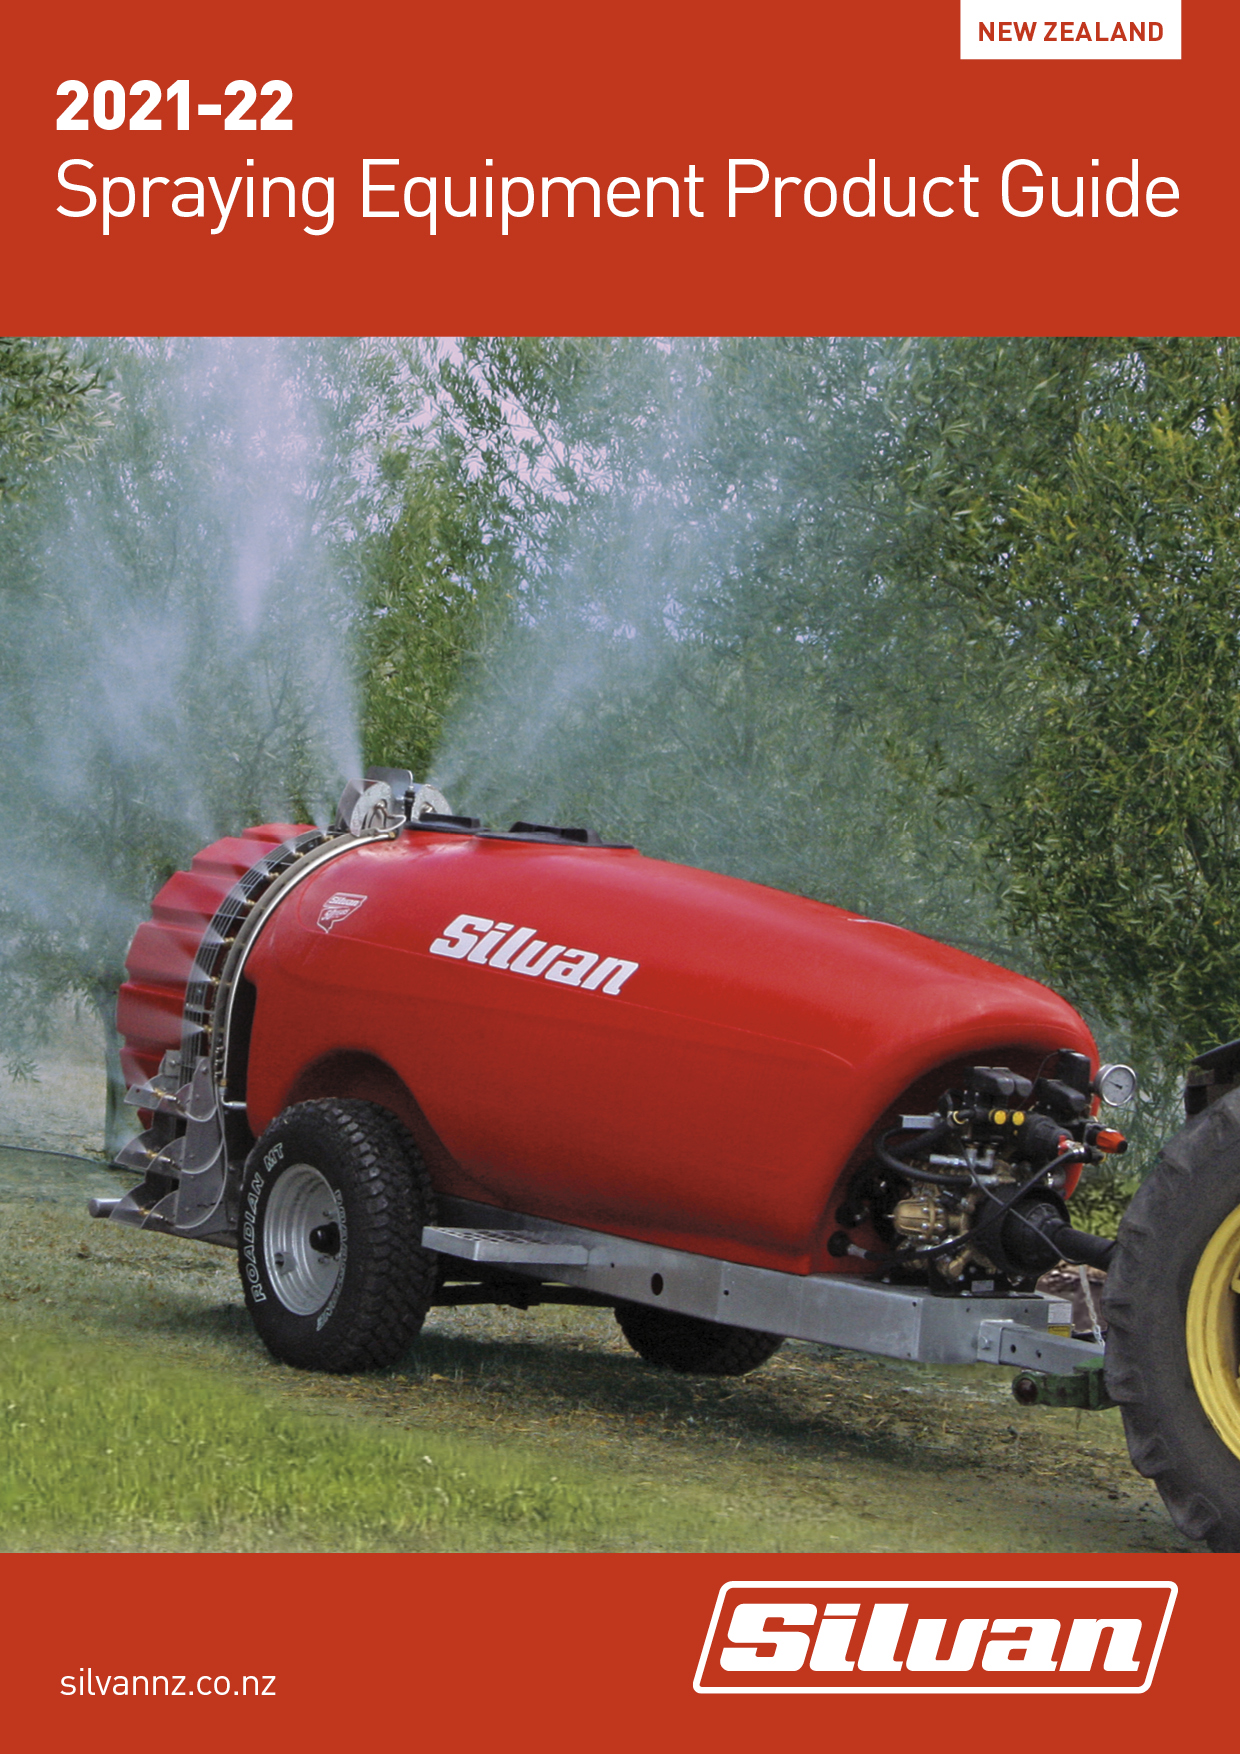 Spraying Equipment Product Guide 2021